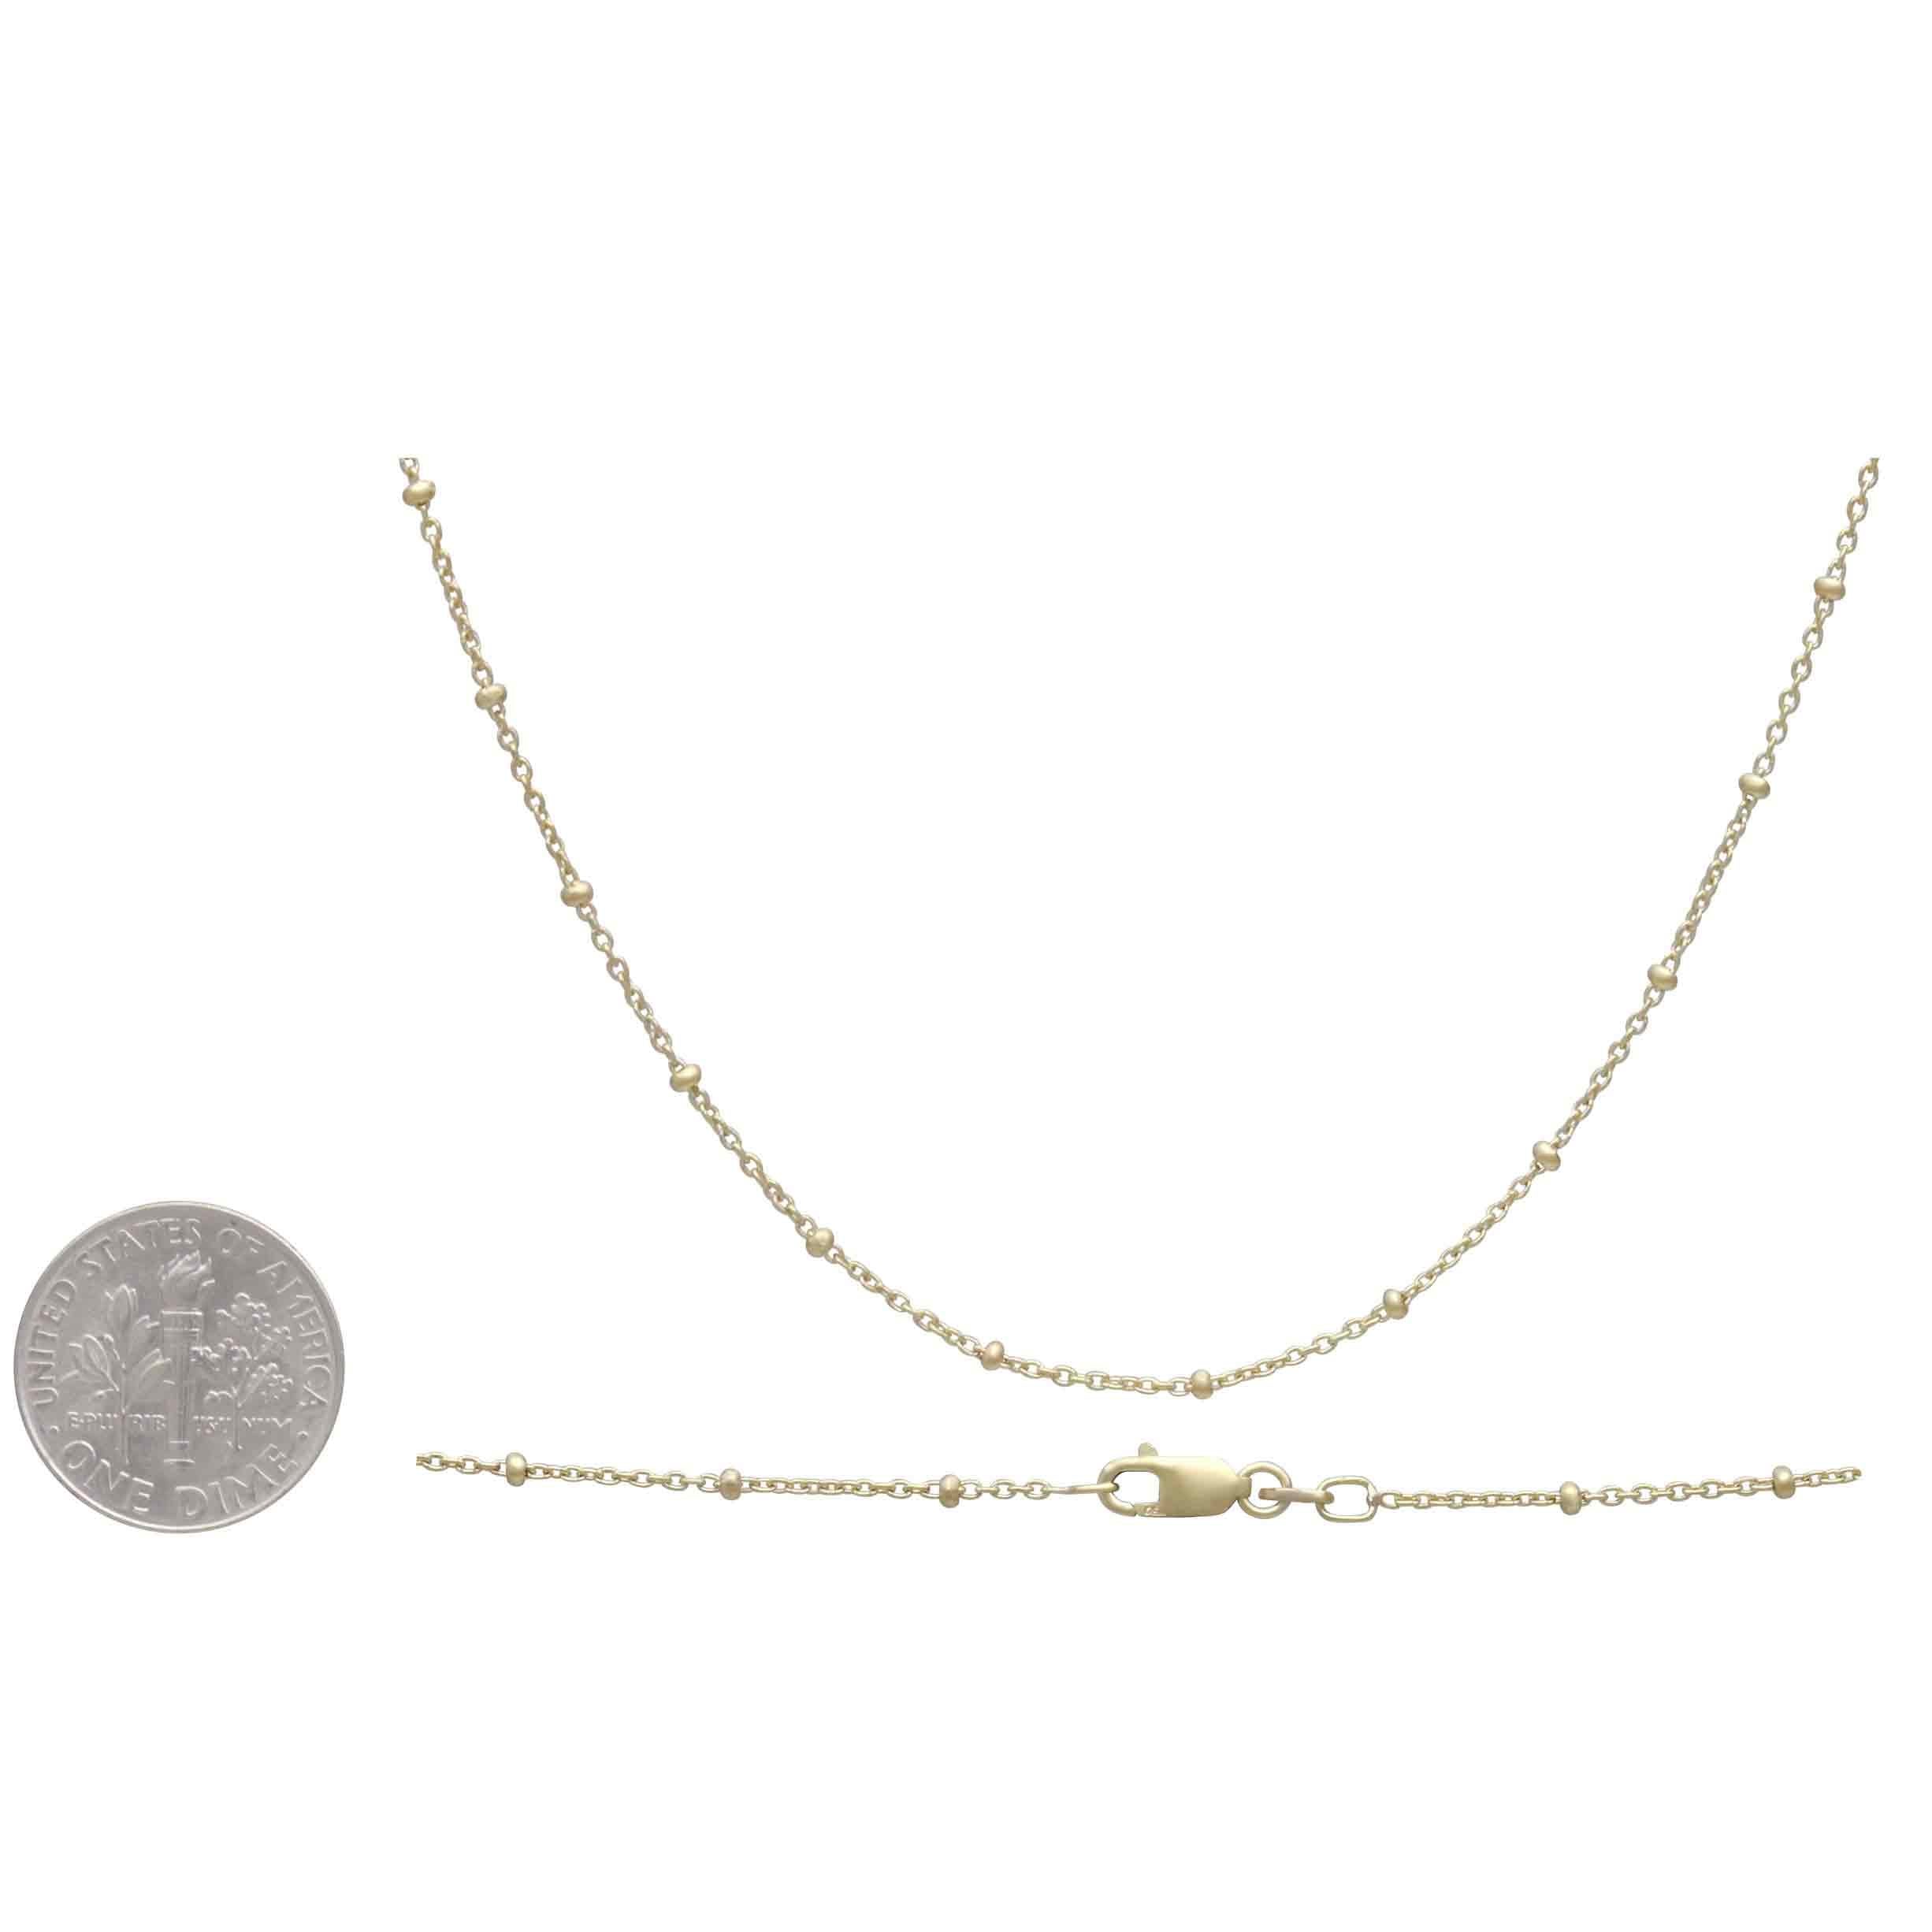 This gold filled satellite chain is perfect for creating charm necklaces. This curb chain feels lovely, each link is flatted and twisted to create a tightly linked sturdy chain. Each link measures approximately 2mm x 1mm and features a 8mm lobster clasp. This is a dainty satellite chain composed of tiny round links punctuated with gold beads that add a rich texture.  Wear on its own or with a charm. Perfect layering piece.